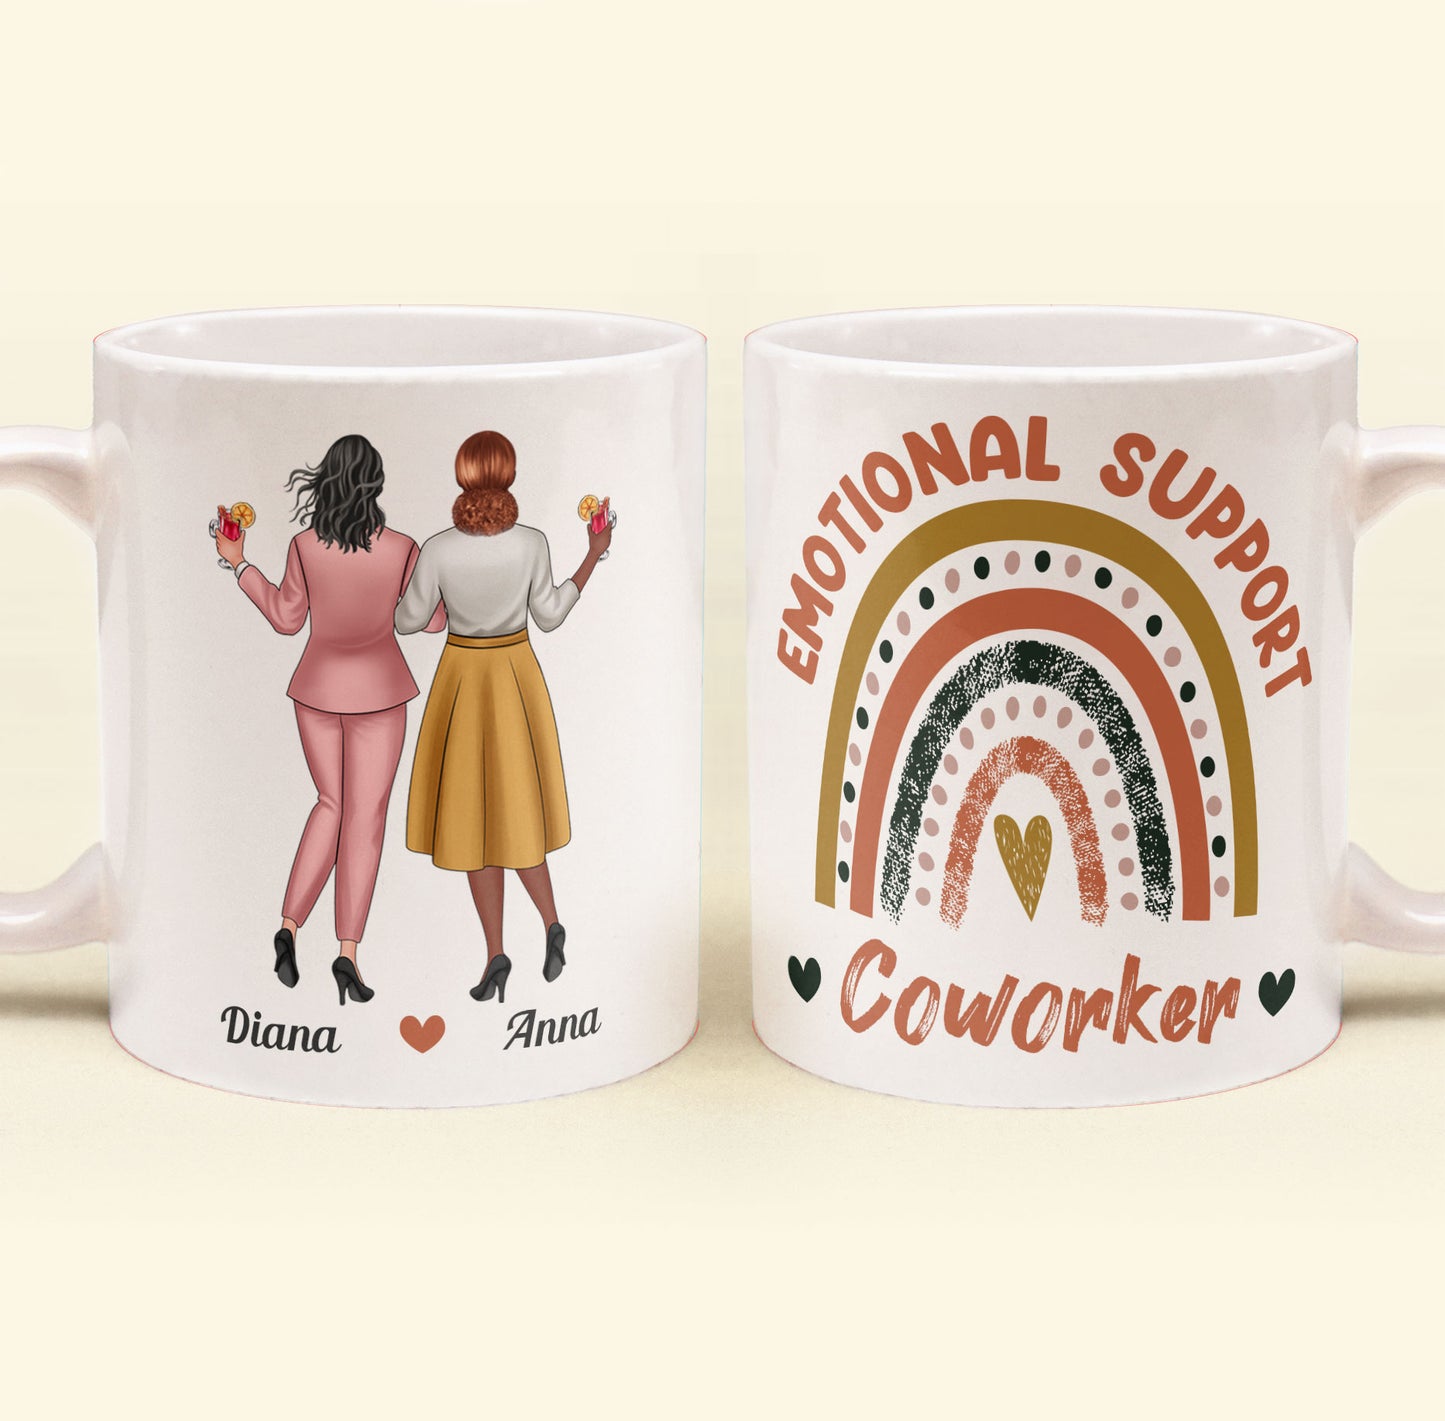 Emotional Support Coworker - Personalized Mug